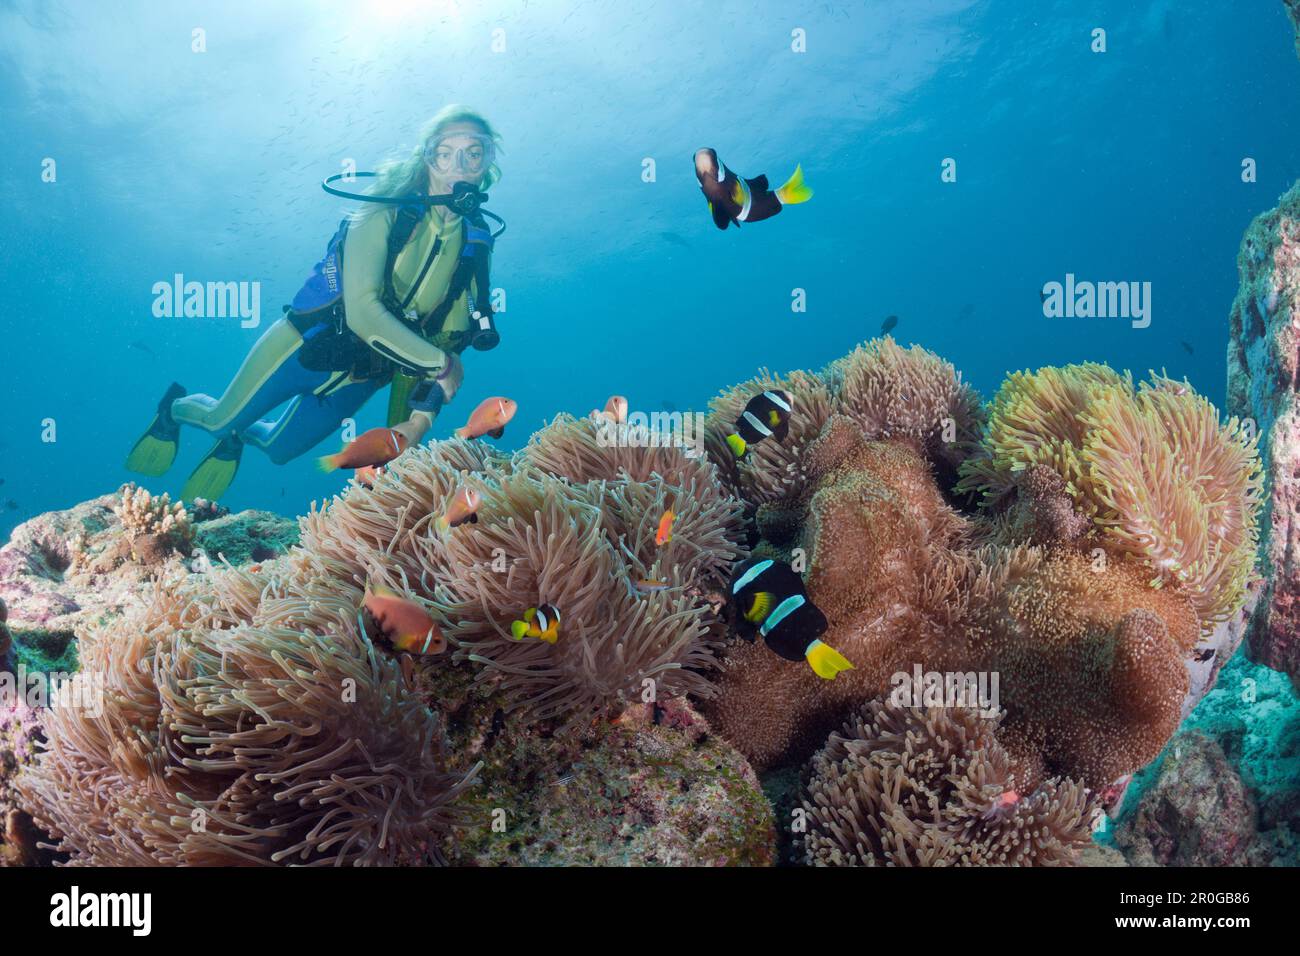 Diver with Magnificent Anemone with Maldive Anemonefish and Clarks Anemonefish, Heteractis magnifica, Amphiprion nigripes, Amphiprion clarkii, Maldive Stock Photo